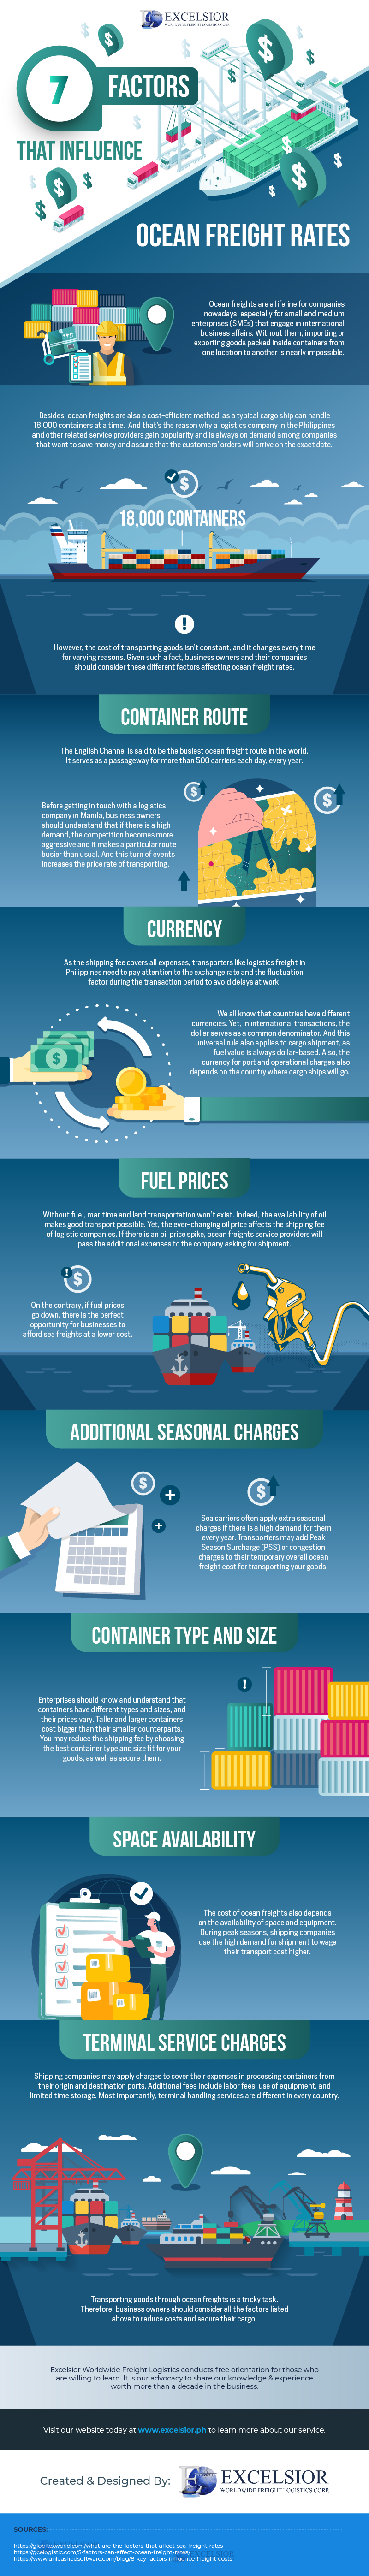 7 Factors that Influence Ocean Freight Rates-01